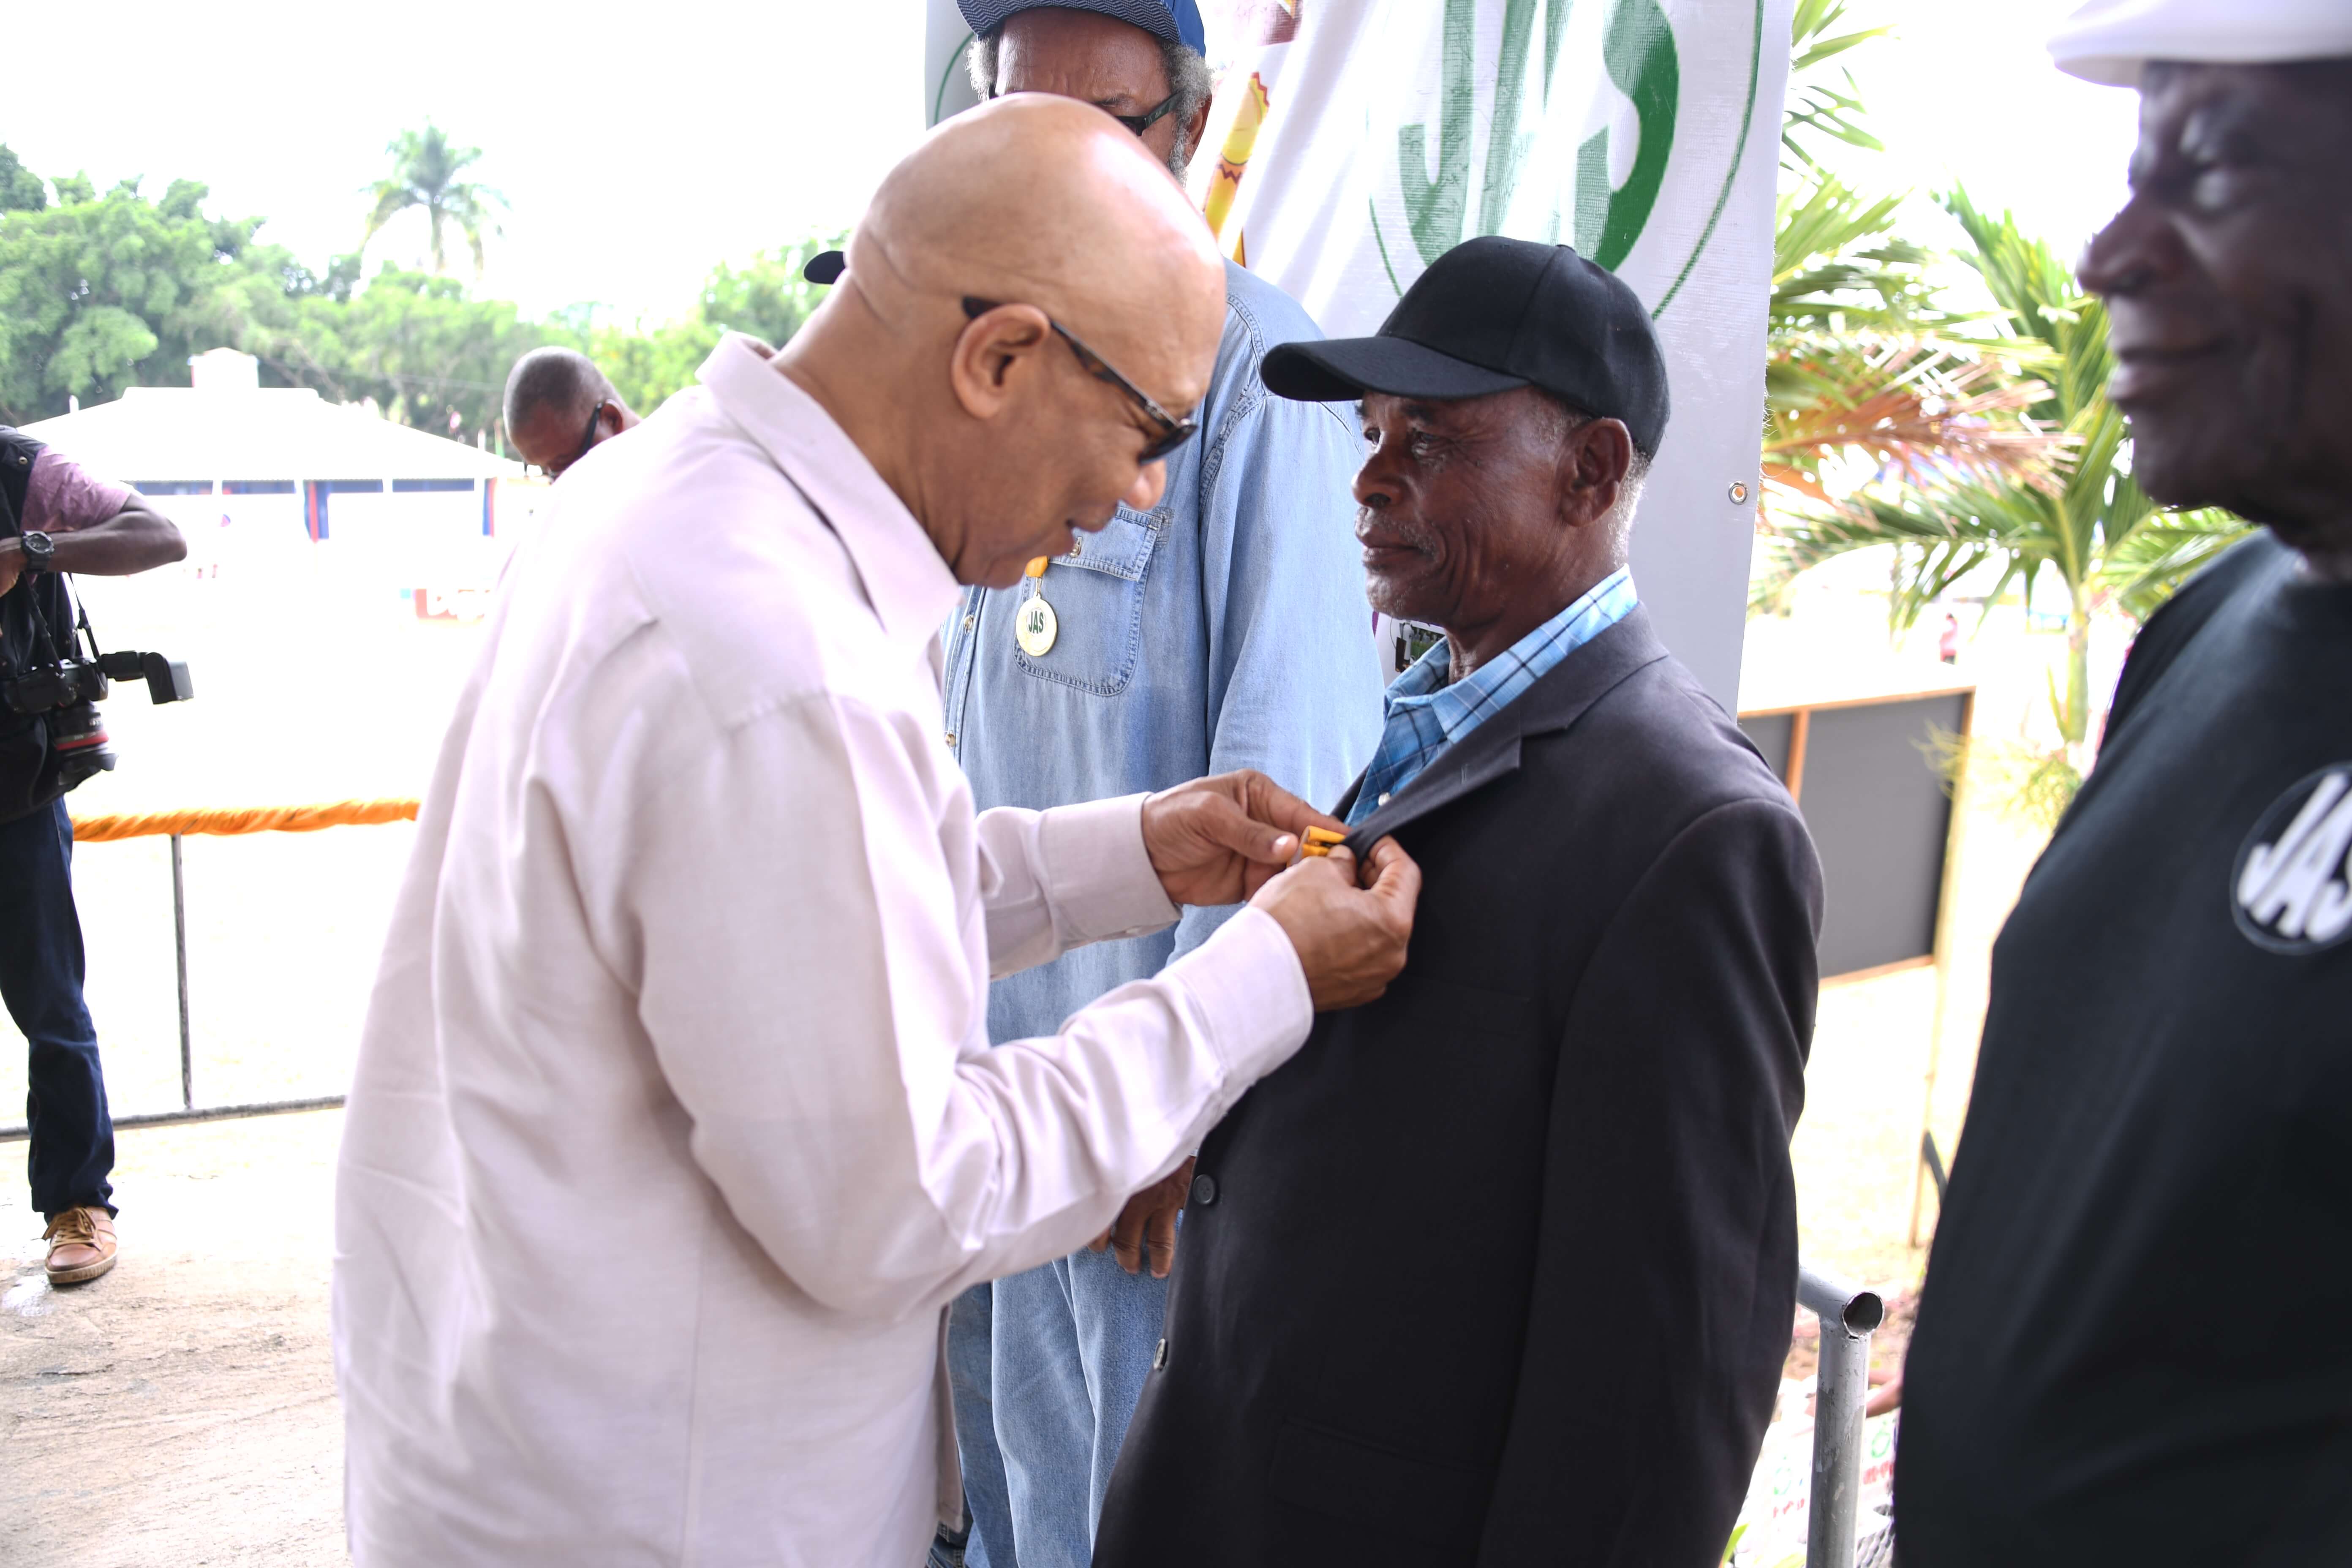 His Excellency the Most Honourable Sir Patrick Allen pins one of the 65 farmers bestowed with a medals of appreciation for their outstanding contribution to the agricultural sector during. The occasion was the 65th staging of Denbigh Agricultural, Industrial and Food Show in Clarendon on Sunday (August 6, 2017).